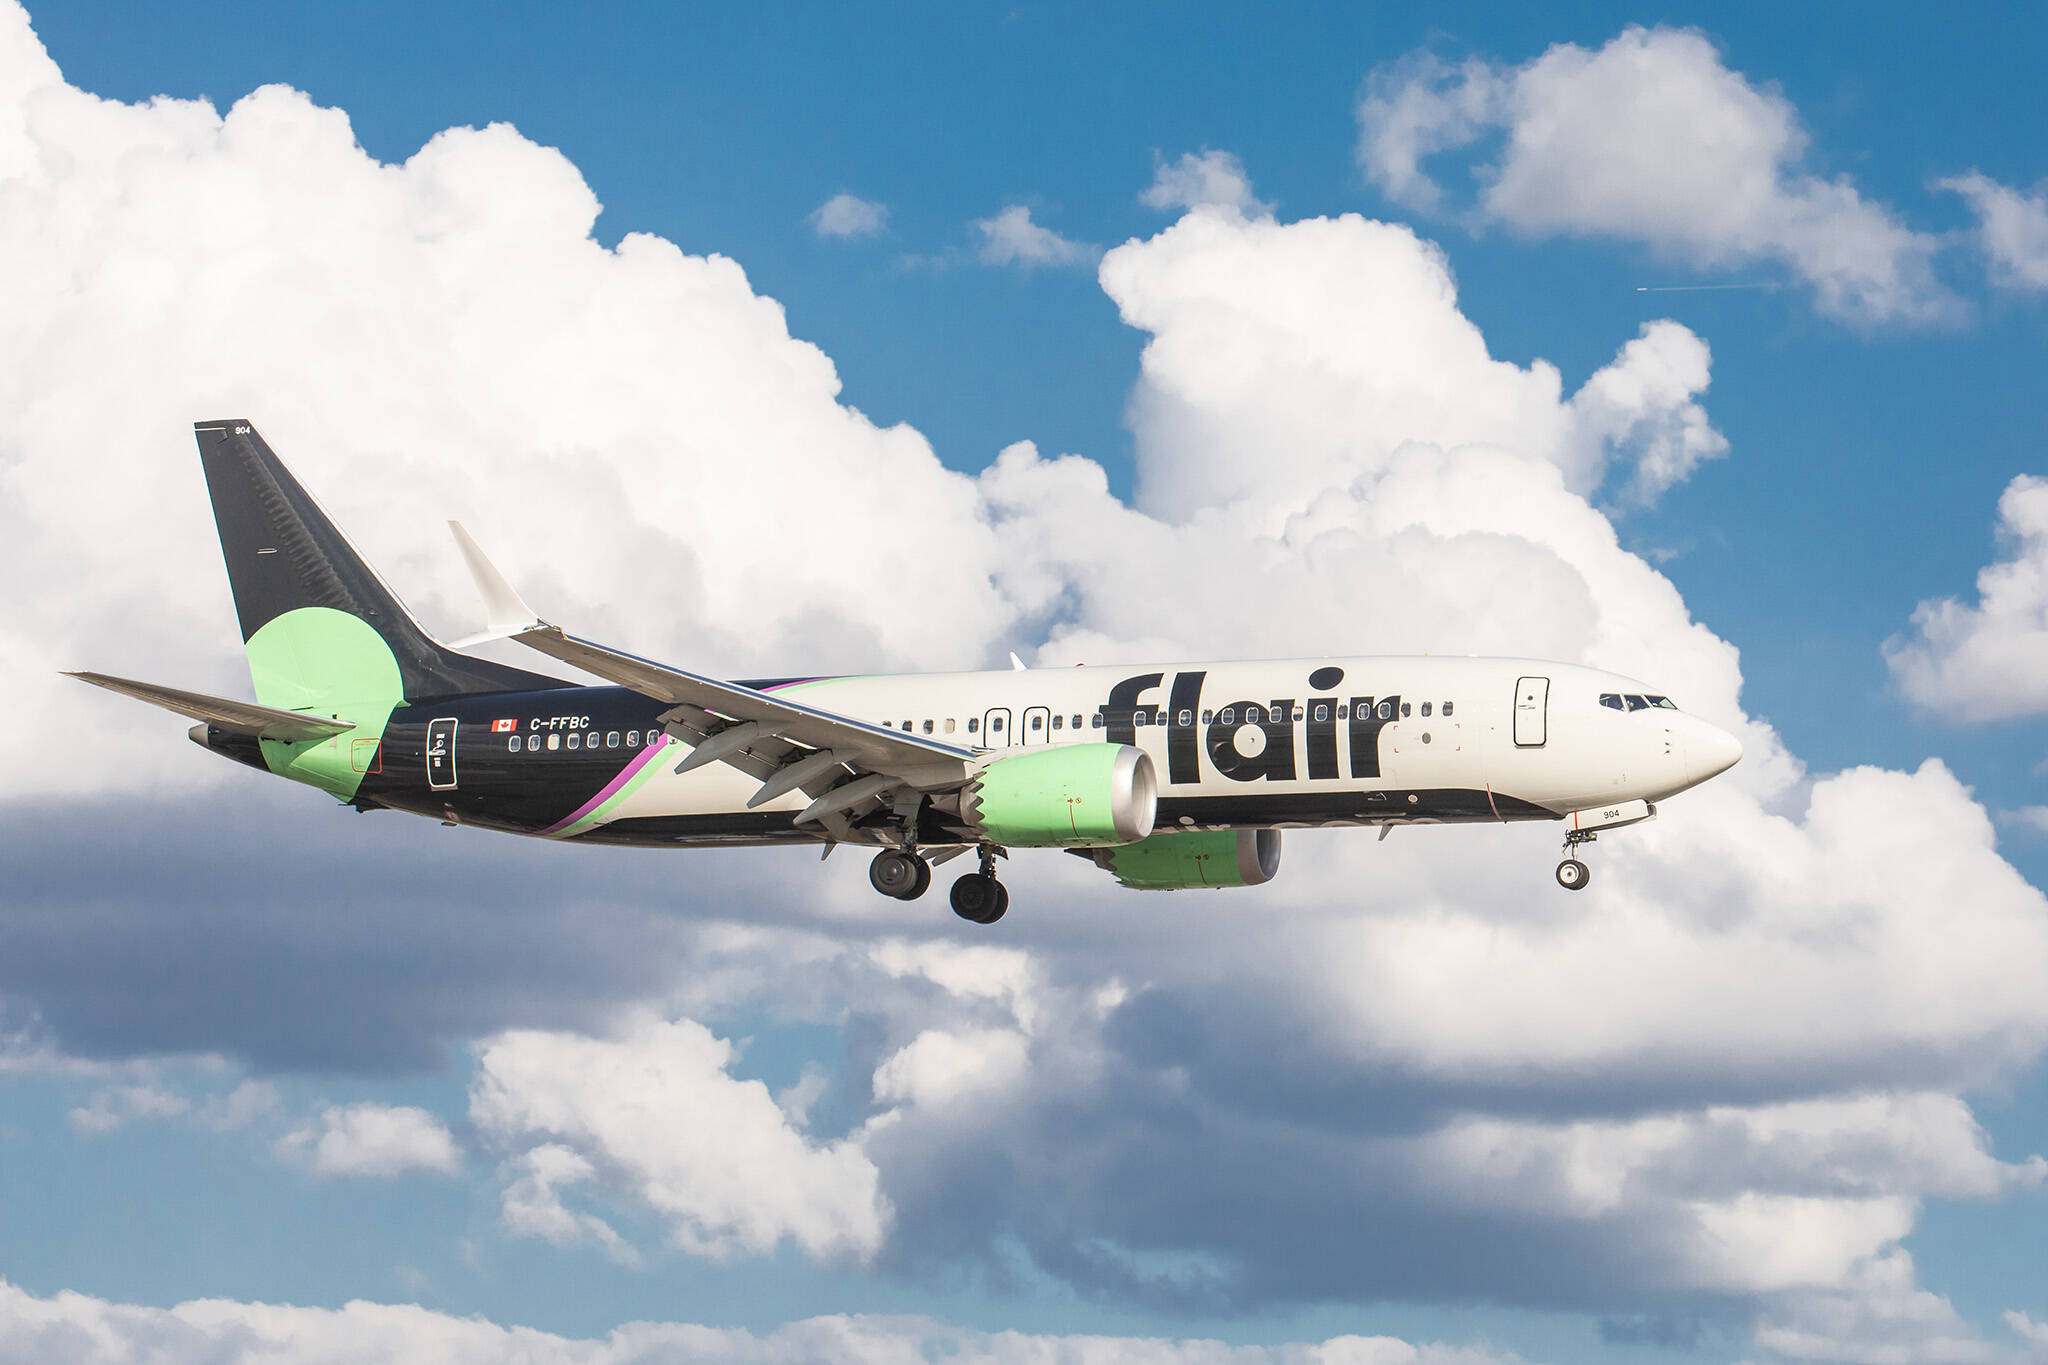 Flair Airlines birthday sale